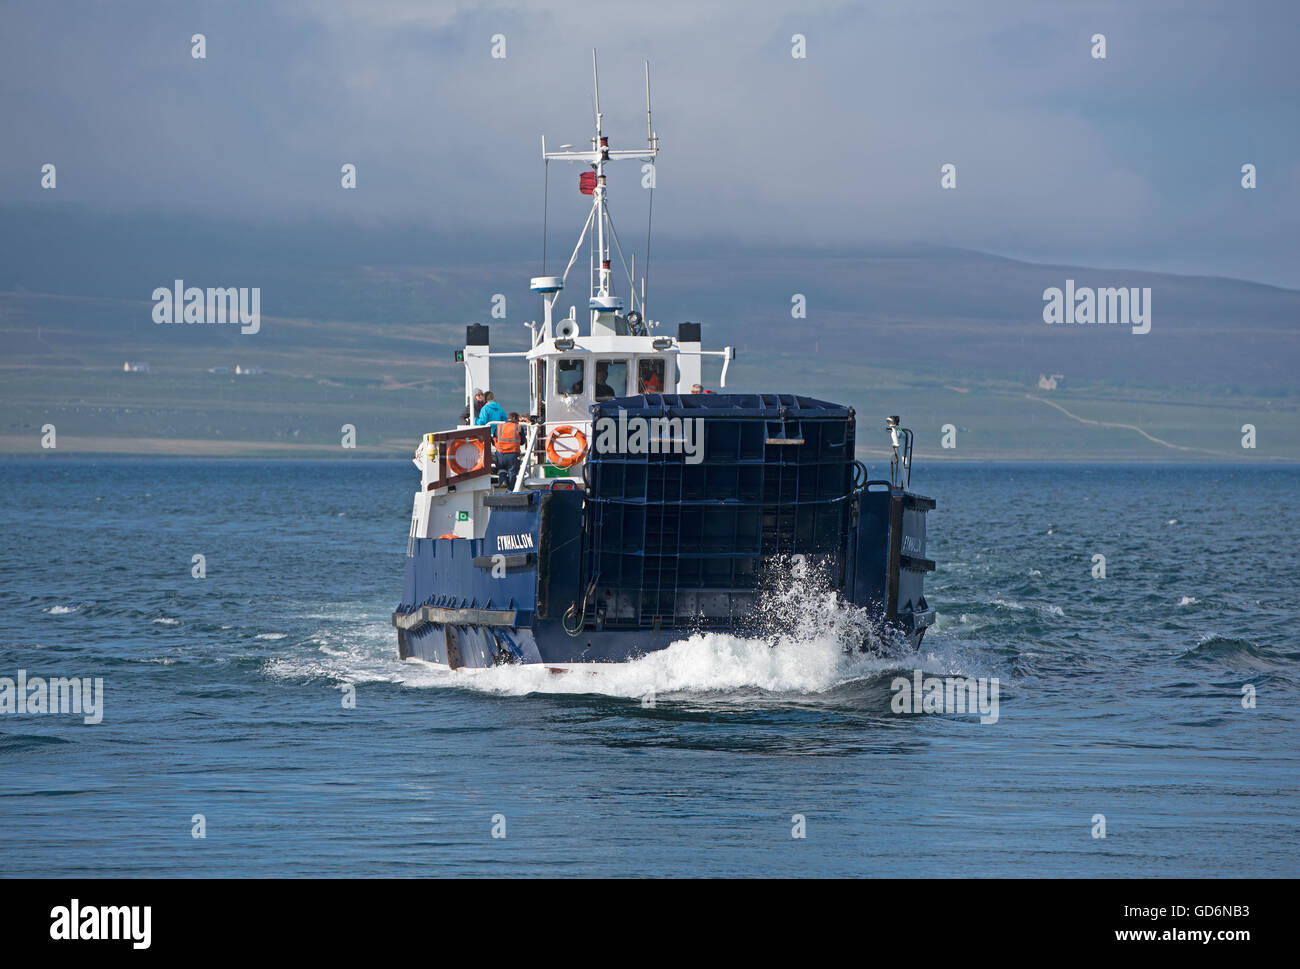 Rousay Ferry 'Eynhallow' sailing across from Brinain to Tingwall on the North shore of the Orkney Isles Mainland.  SCO 10,579. Stock Photo